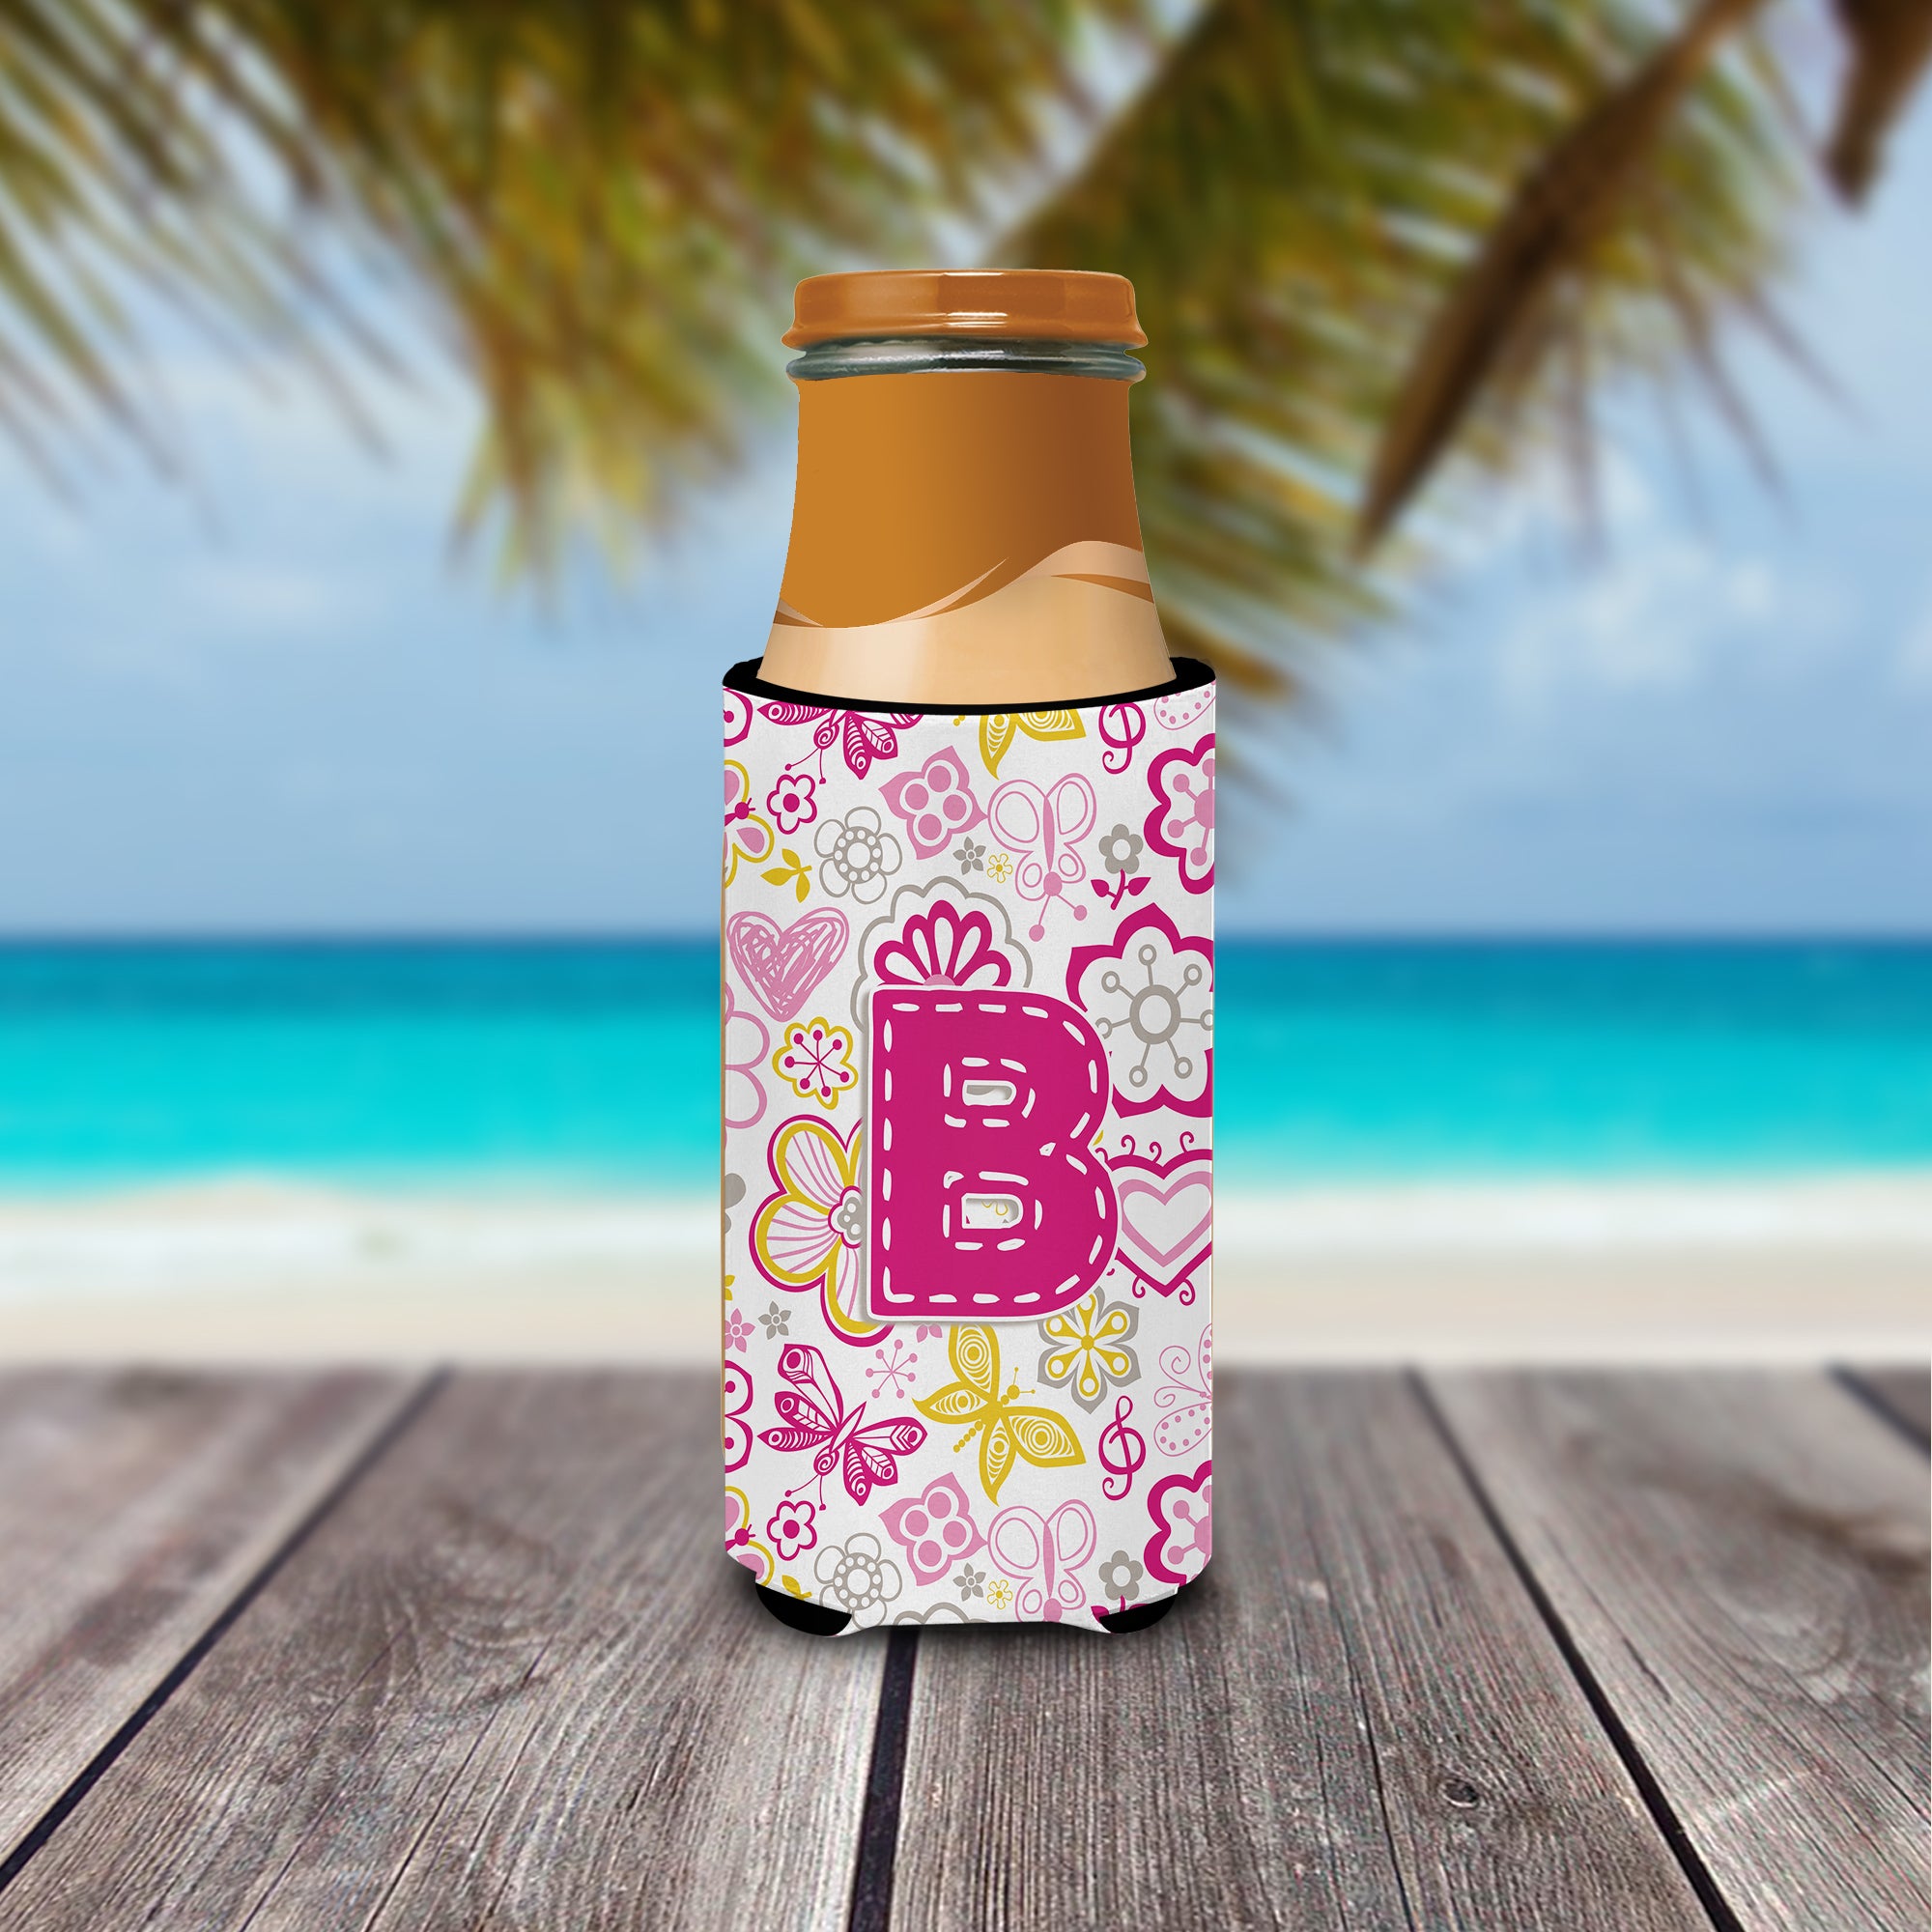 Letter B Flowers and Butterflies Pink Ultra Beverage Insulators for slim cans CJ2005-BMUK.